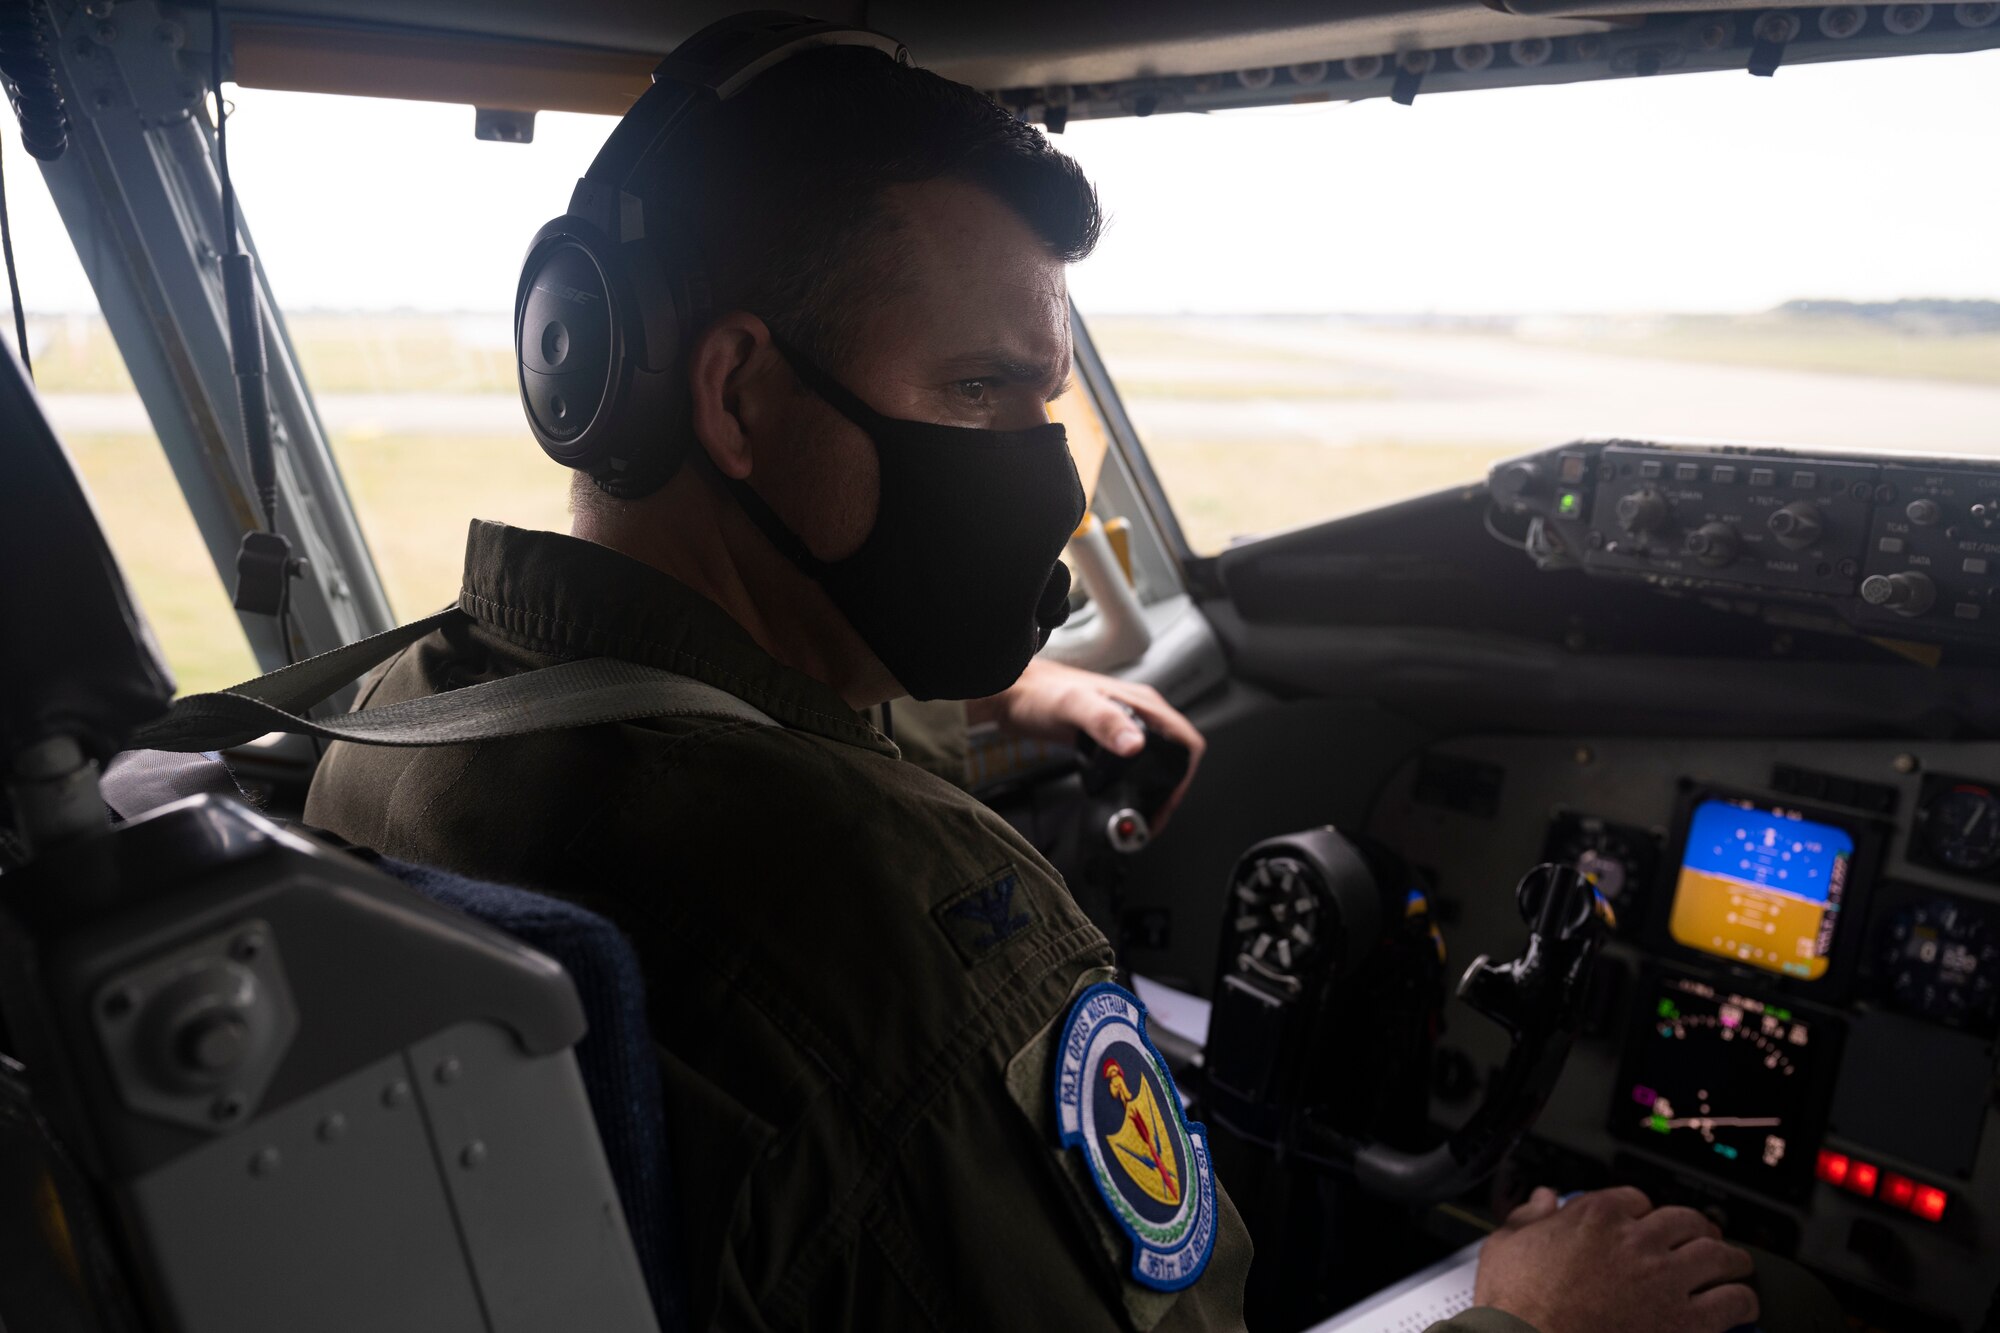 U.S. Air Force Col. Gene Jacobus, 100th Air Refueling Wing commander, conducts preflight operations in a KC-135 Stratotanker aircraft prior to his first flight as commander of the 100th ARW at Royal Air Force Mildenhall, England, Sept. 1, 2021. The 100th ARW is the only permanent U.S. air refueling wing in the European theater that provides the critical air fueling support which allows the Expeditionary Air Force to deploy around the globe on a moment’s notice. (U.S. Air Force photo by Airman Alvaro Villagomez)